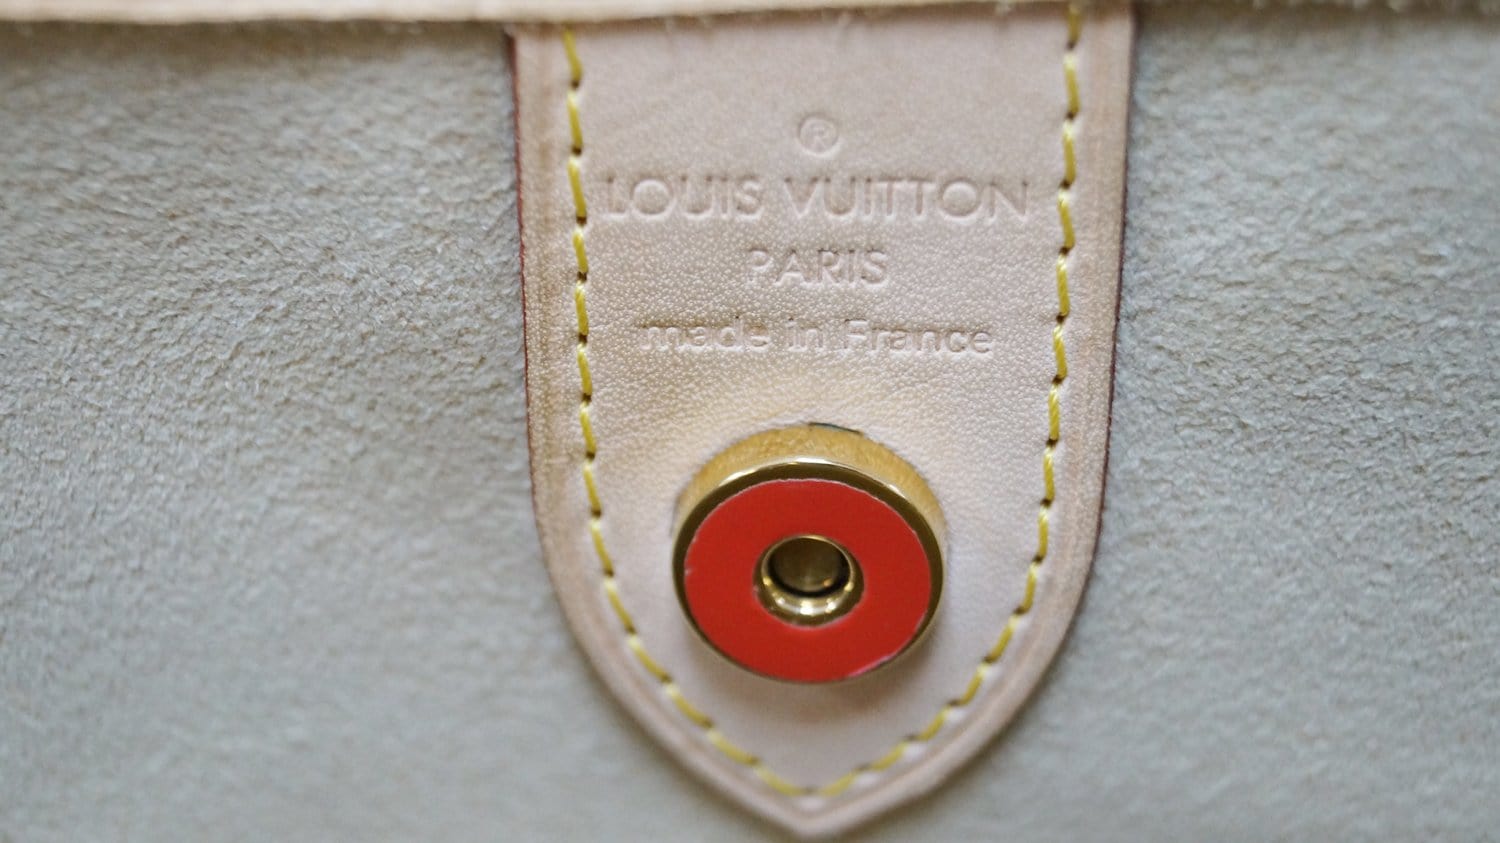 Louis Vuitton Brown Monogram Canvas by LadyGatsbyLuxePaper on